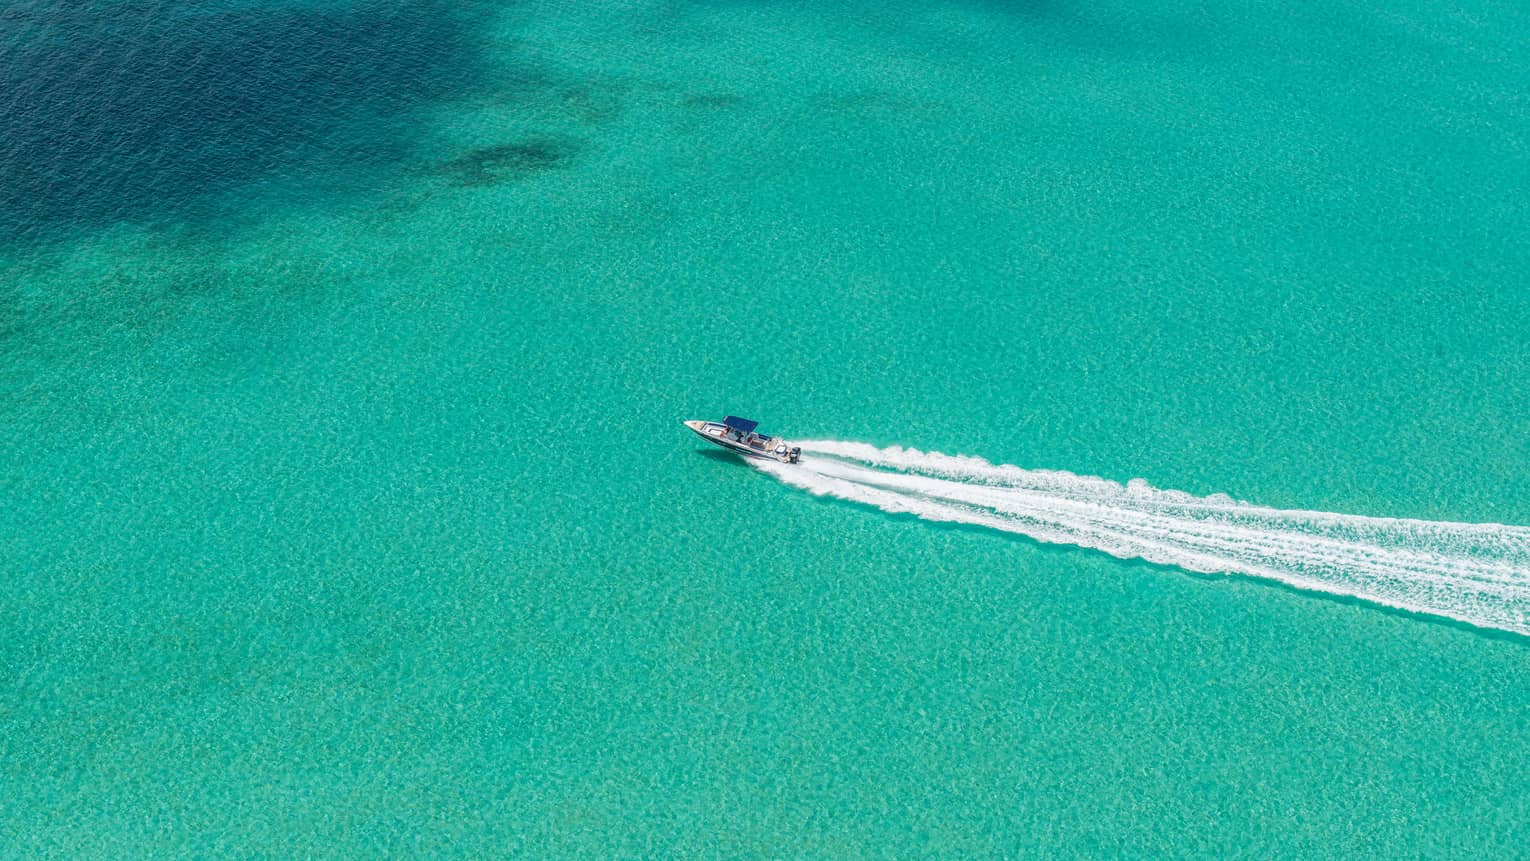 Aerial view of a speedboat moving through a vast expanse of turquoise water, followed by a substantial wake trail.